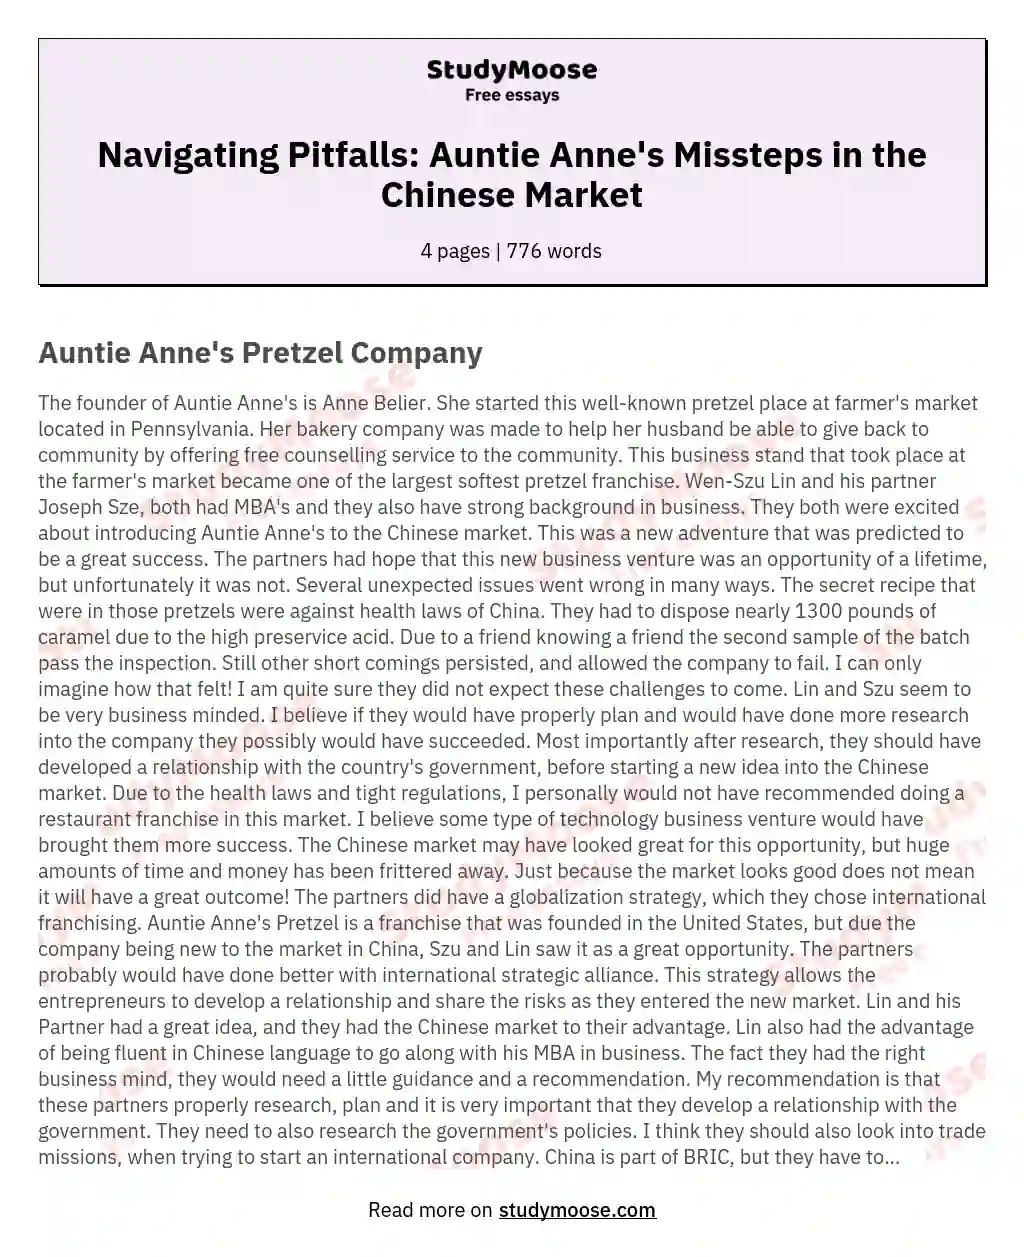 Navigating Pitfalls: Auntie Anne's Missteps in the Chinese Market essay